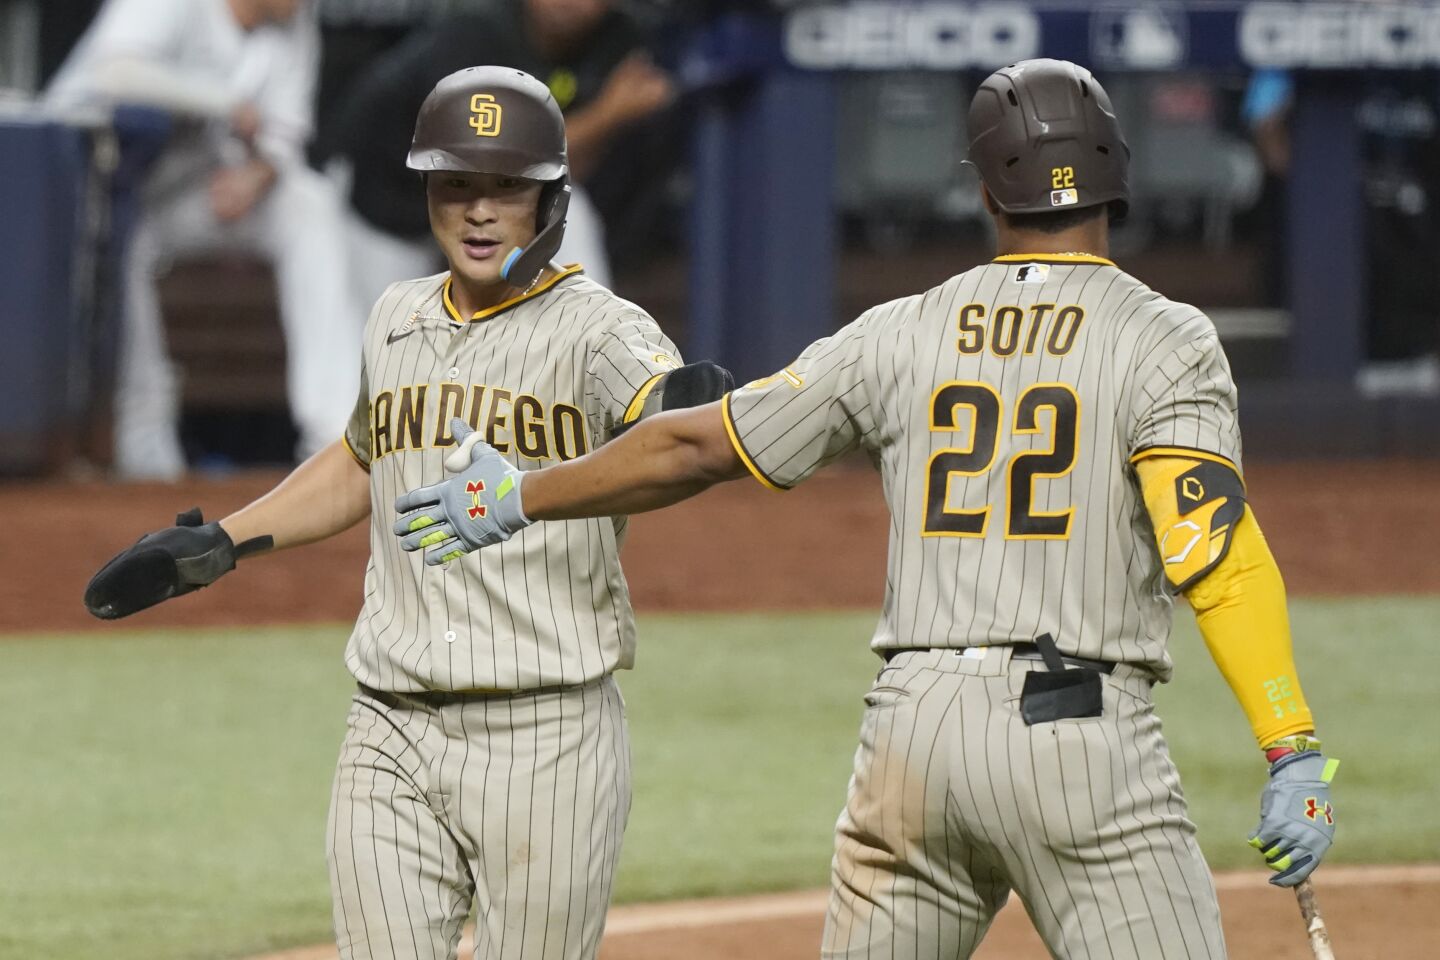 San Diego Padres (66-54, 2nd in NL West)Wednesday’s win avoided a sweep at the hands of the Marlins and allowed the Padres to increase their lead on the Brewers in the race for the final wild-card spot to two games and gain ground on both the Braves (plus-6.5) and Phillies (plus-0.5) in the races for the No. 4 and No. 5 seeds.